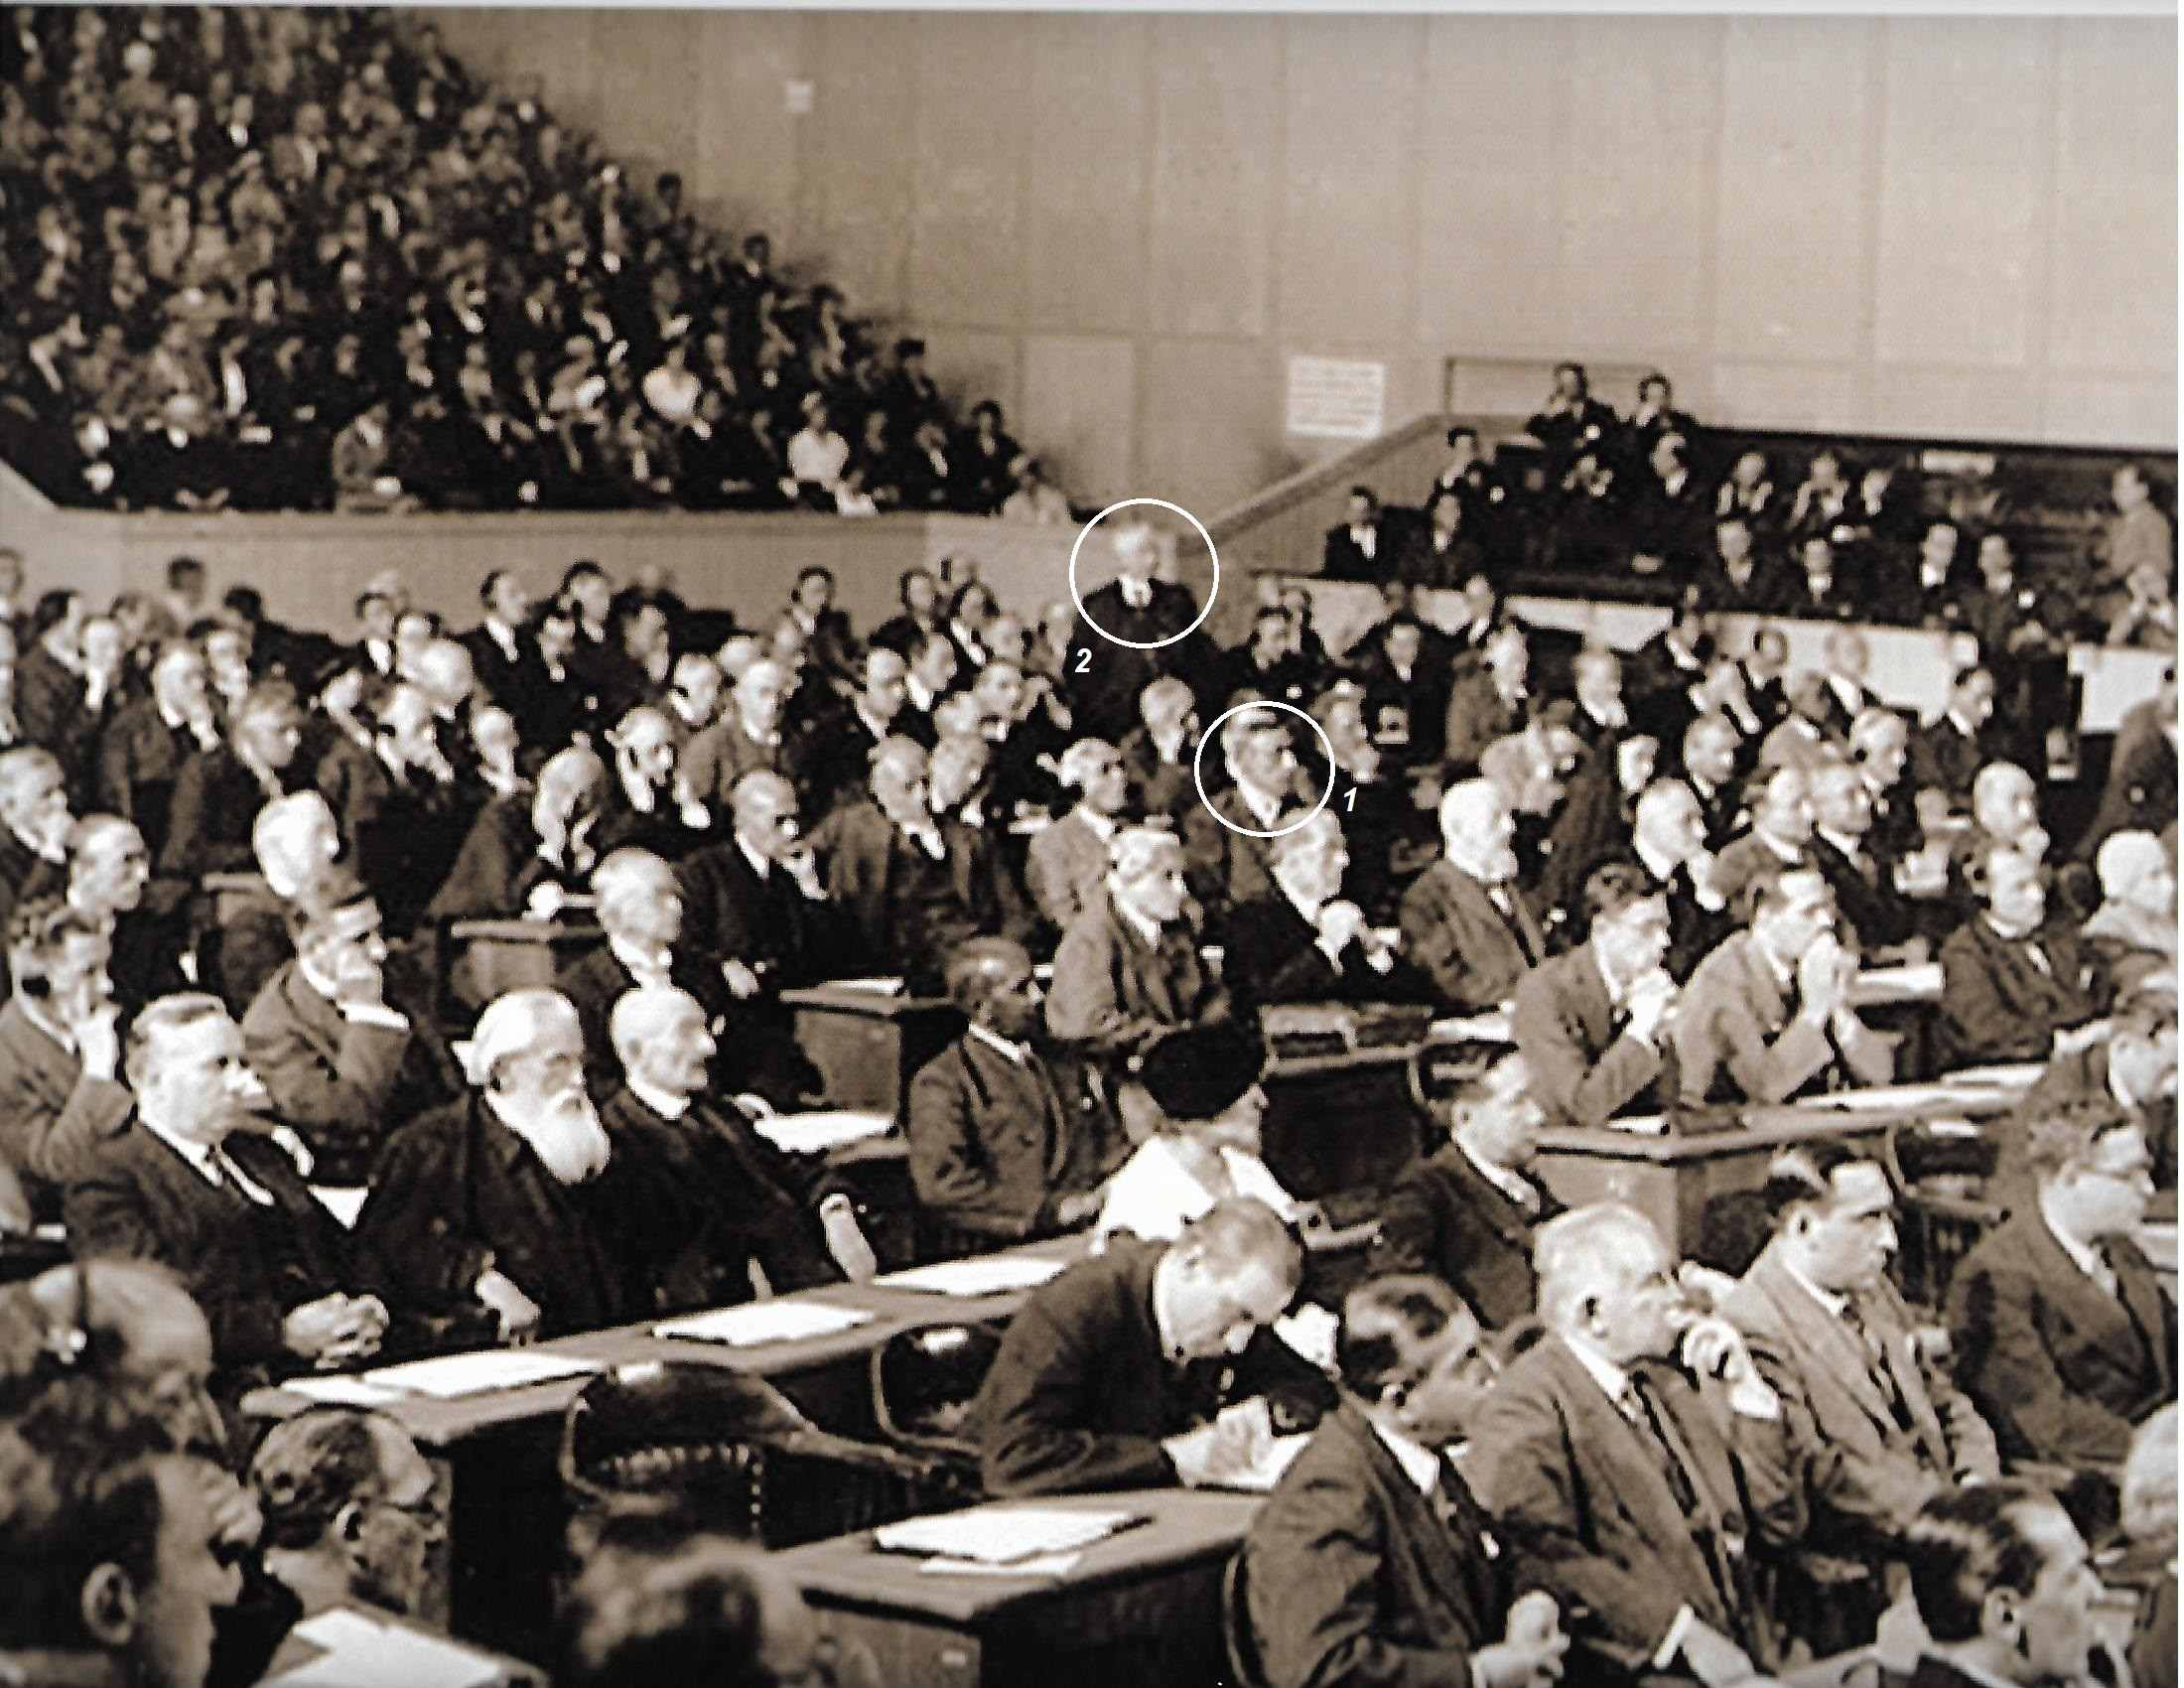 Sir Samad (1) attending the Assembly the League of Nations in Geneva in 1933. Standing behind him is the Agha Khan (2).